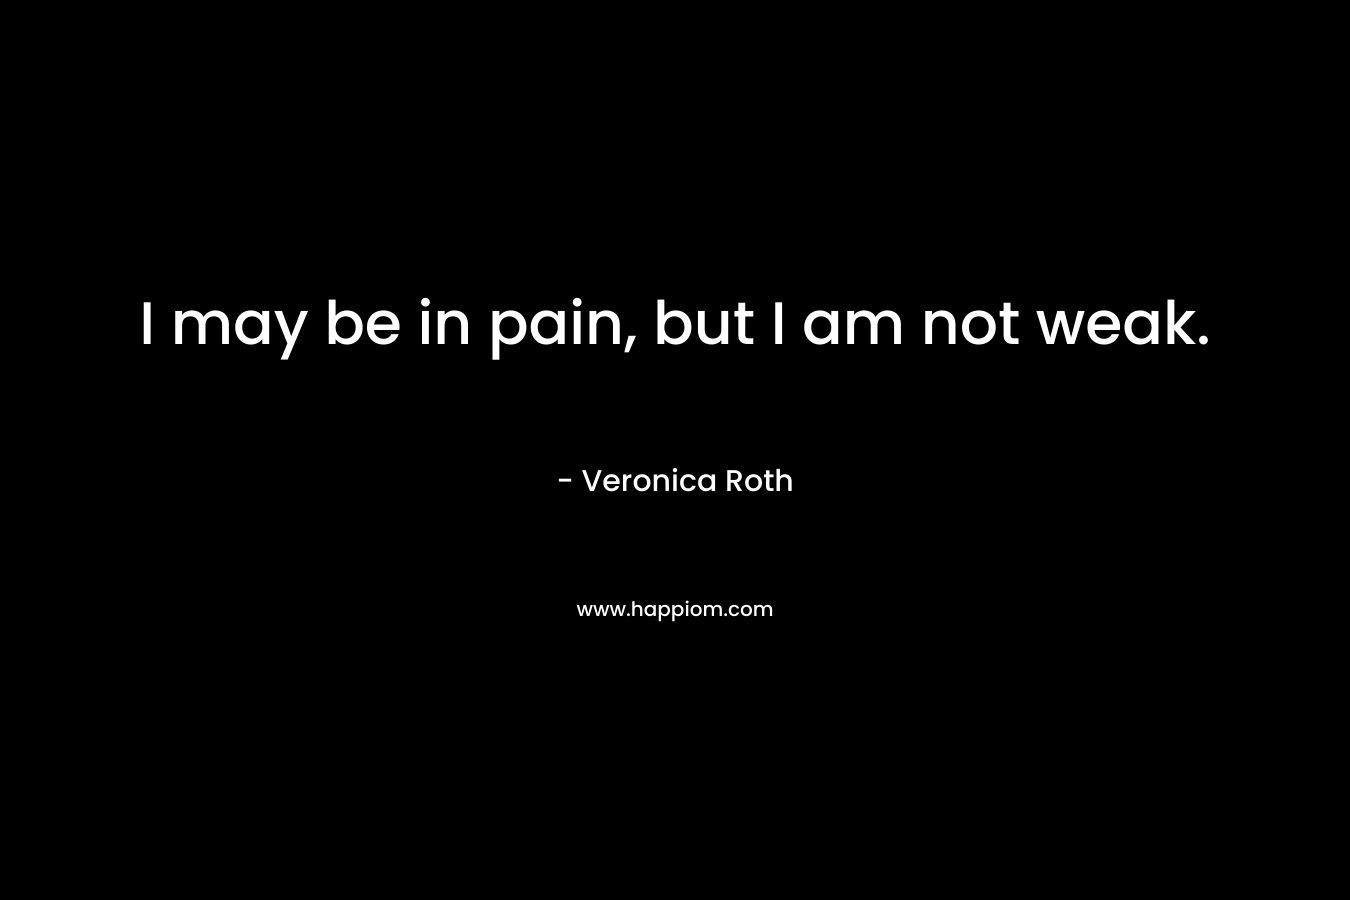 I may be in pain, but I am not weak.